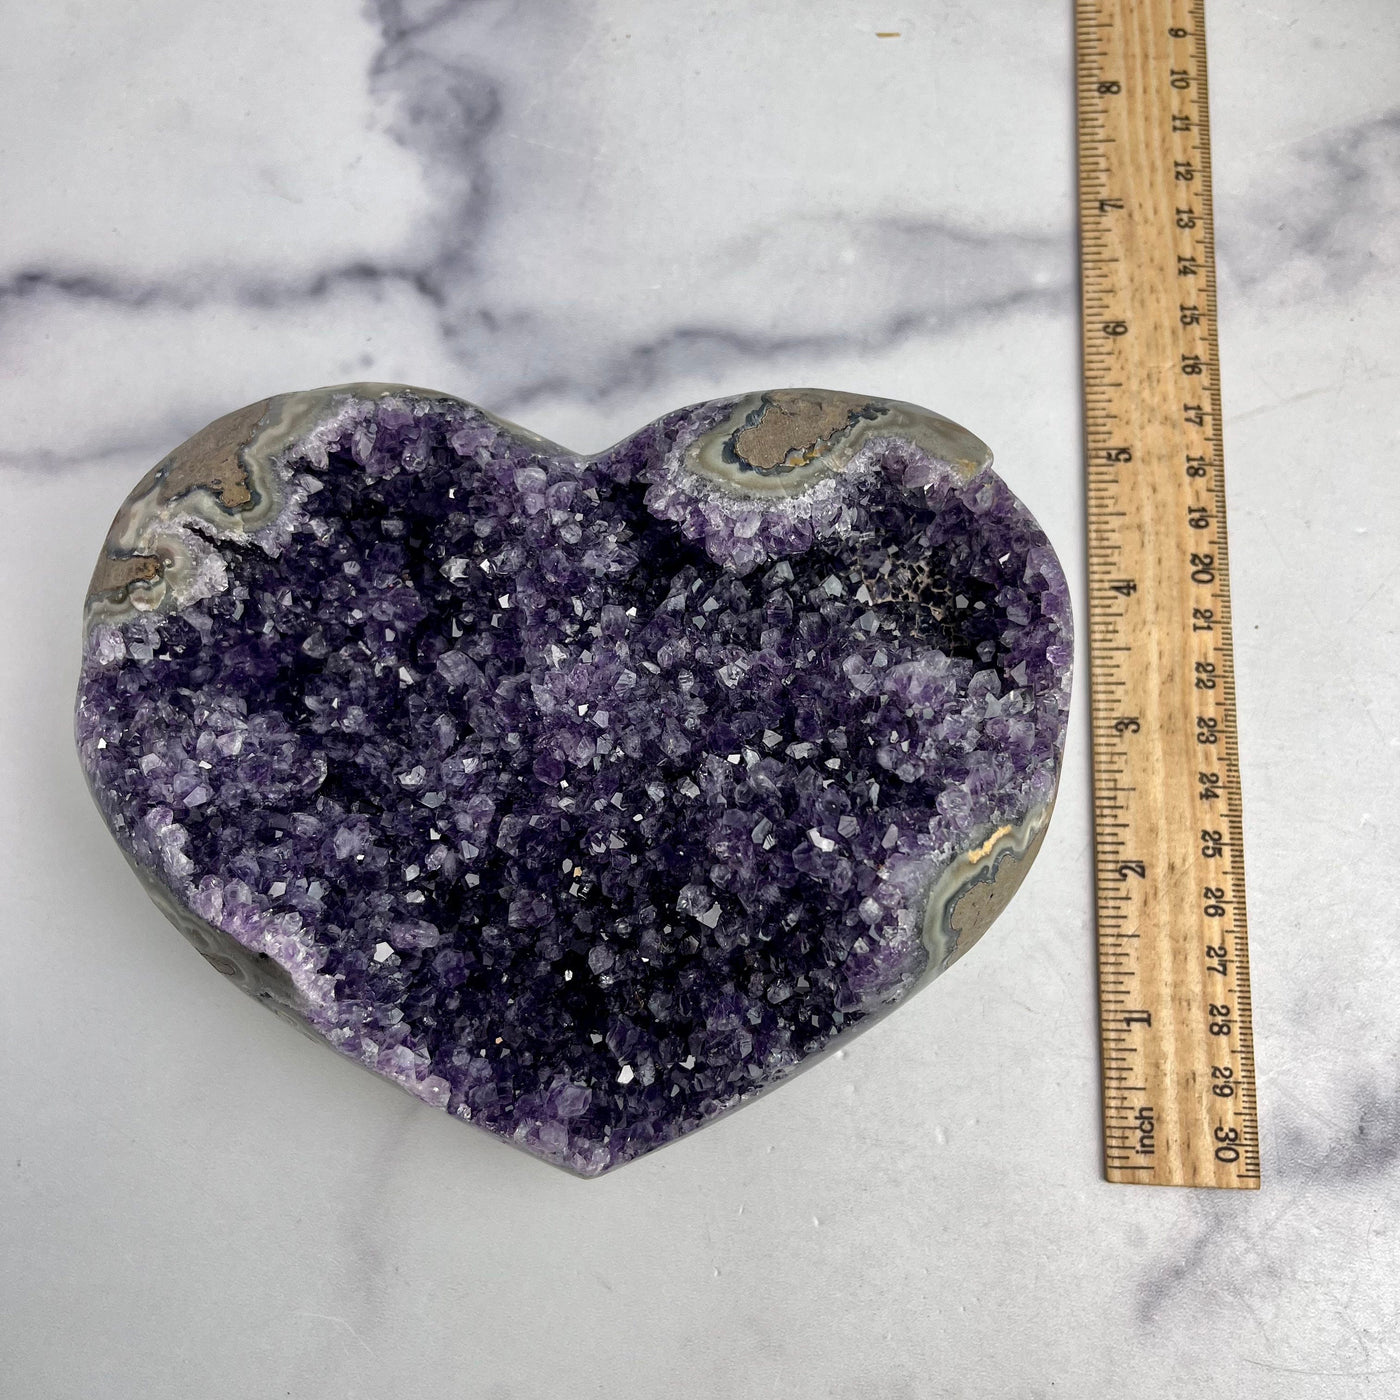 Amethyst Heart Purple Druzy With Ruler For Size Refernce 